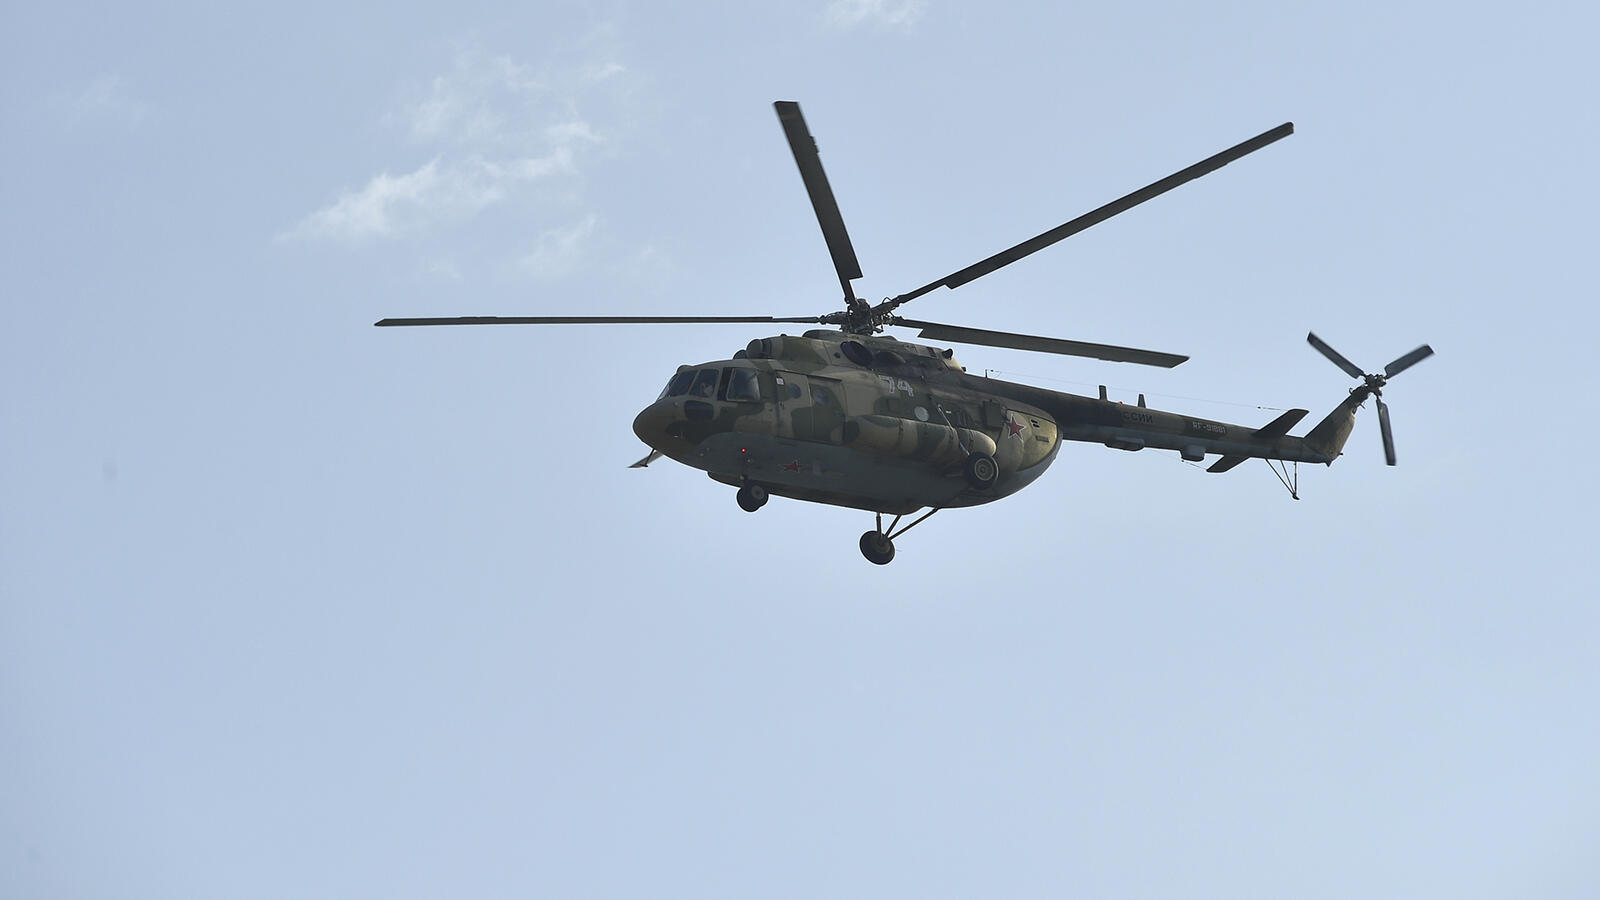 Wallpapers military helicopter sky on the desktop